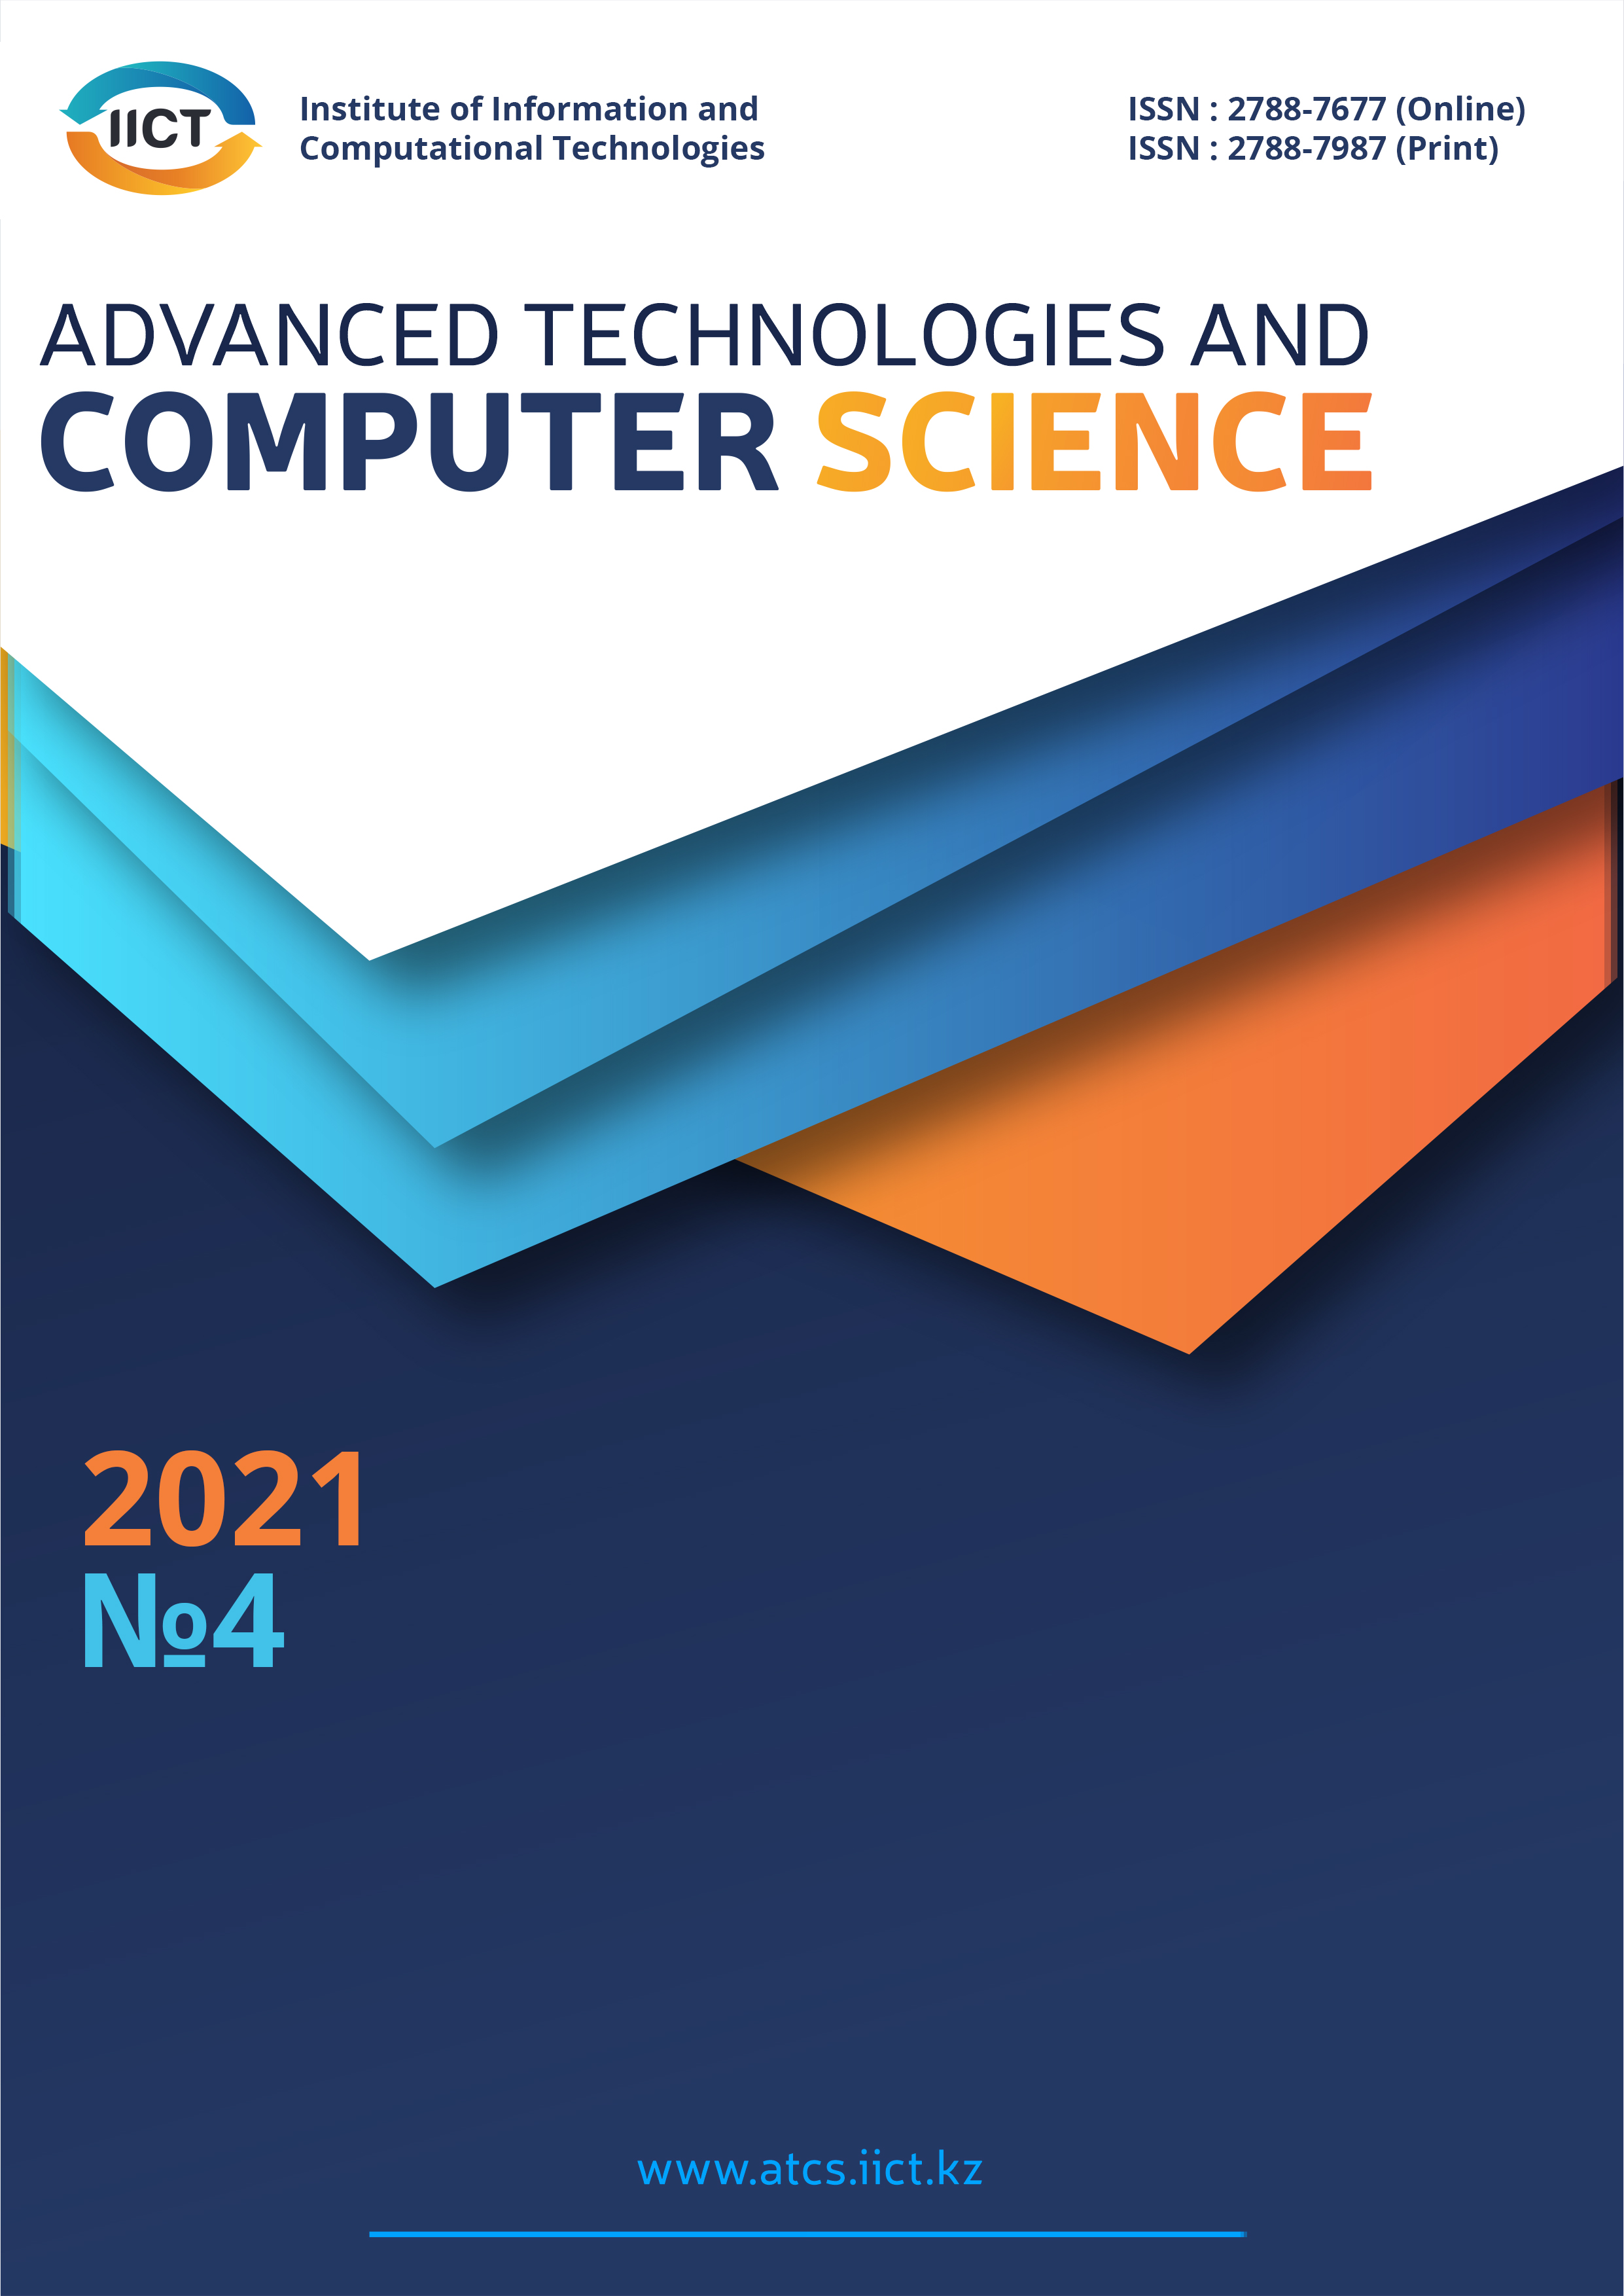 					View No. 4 (2021): Advanced technologies and computer science
				